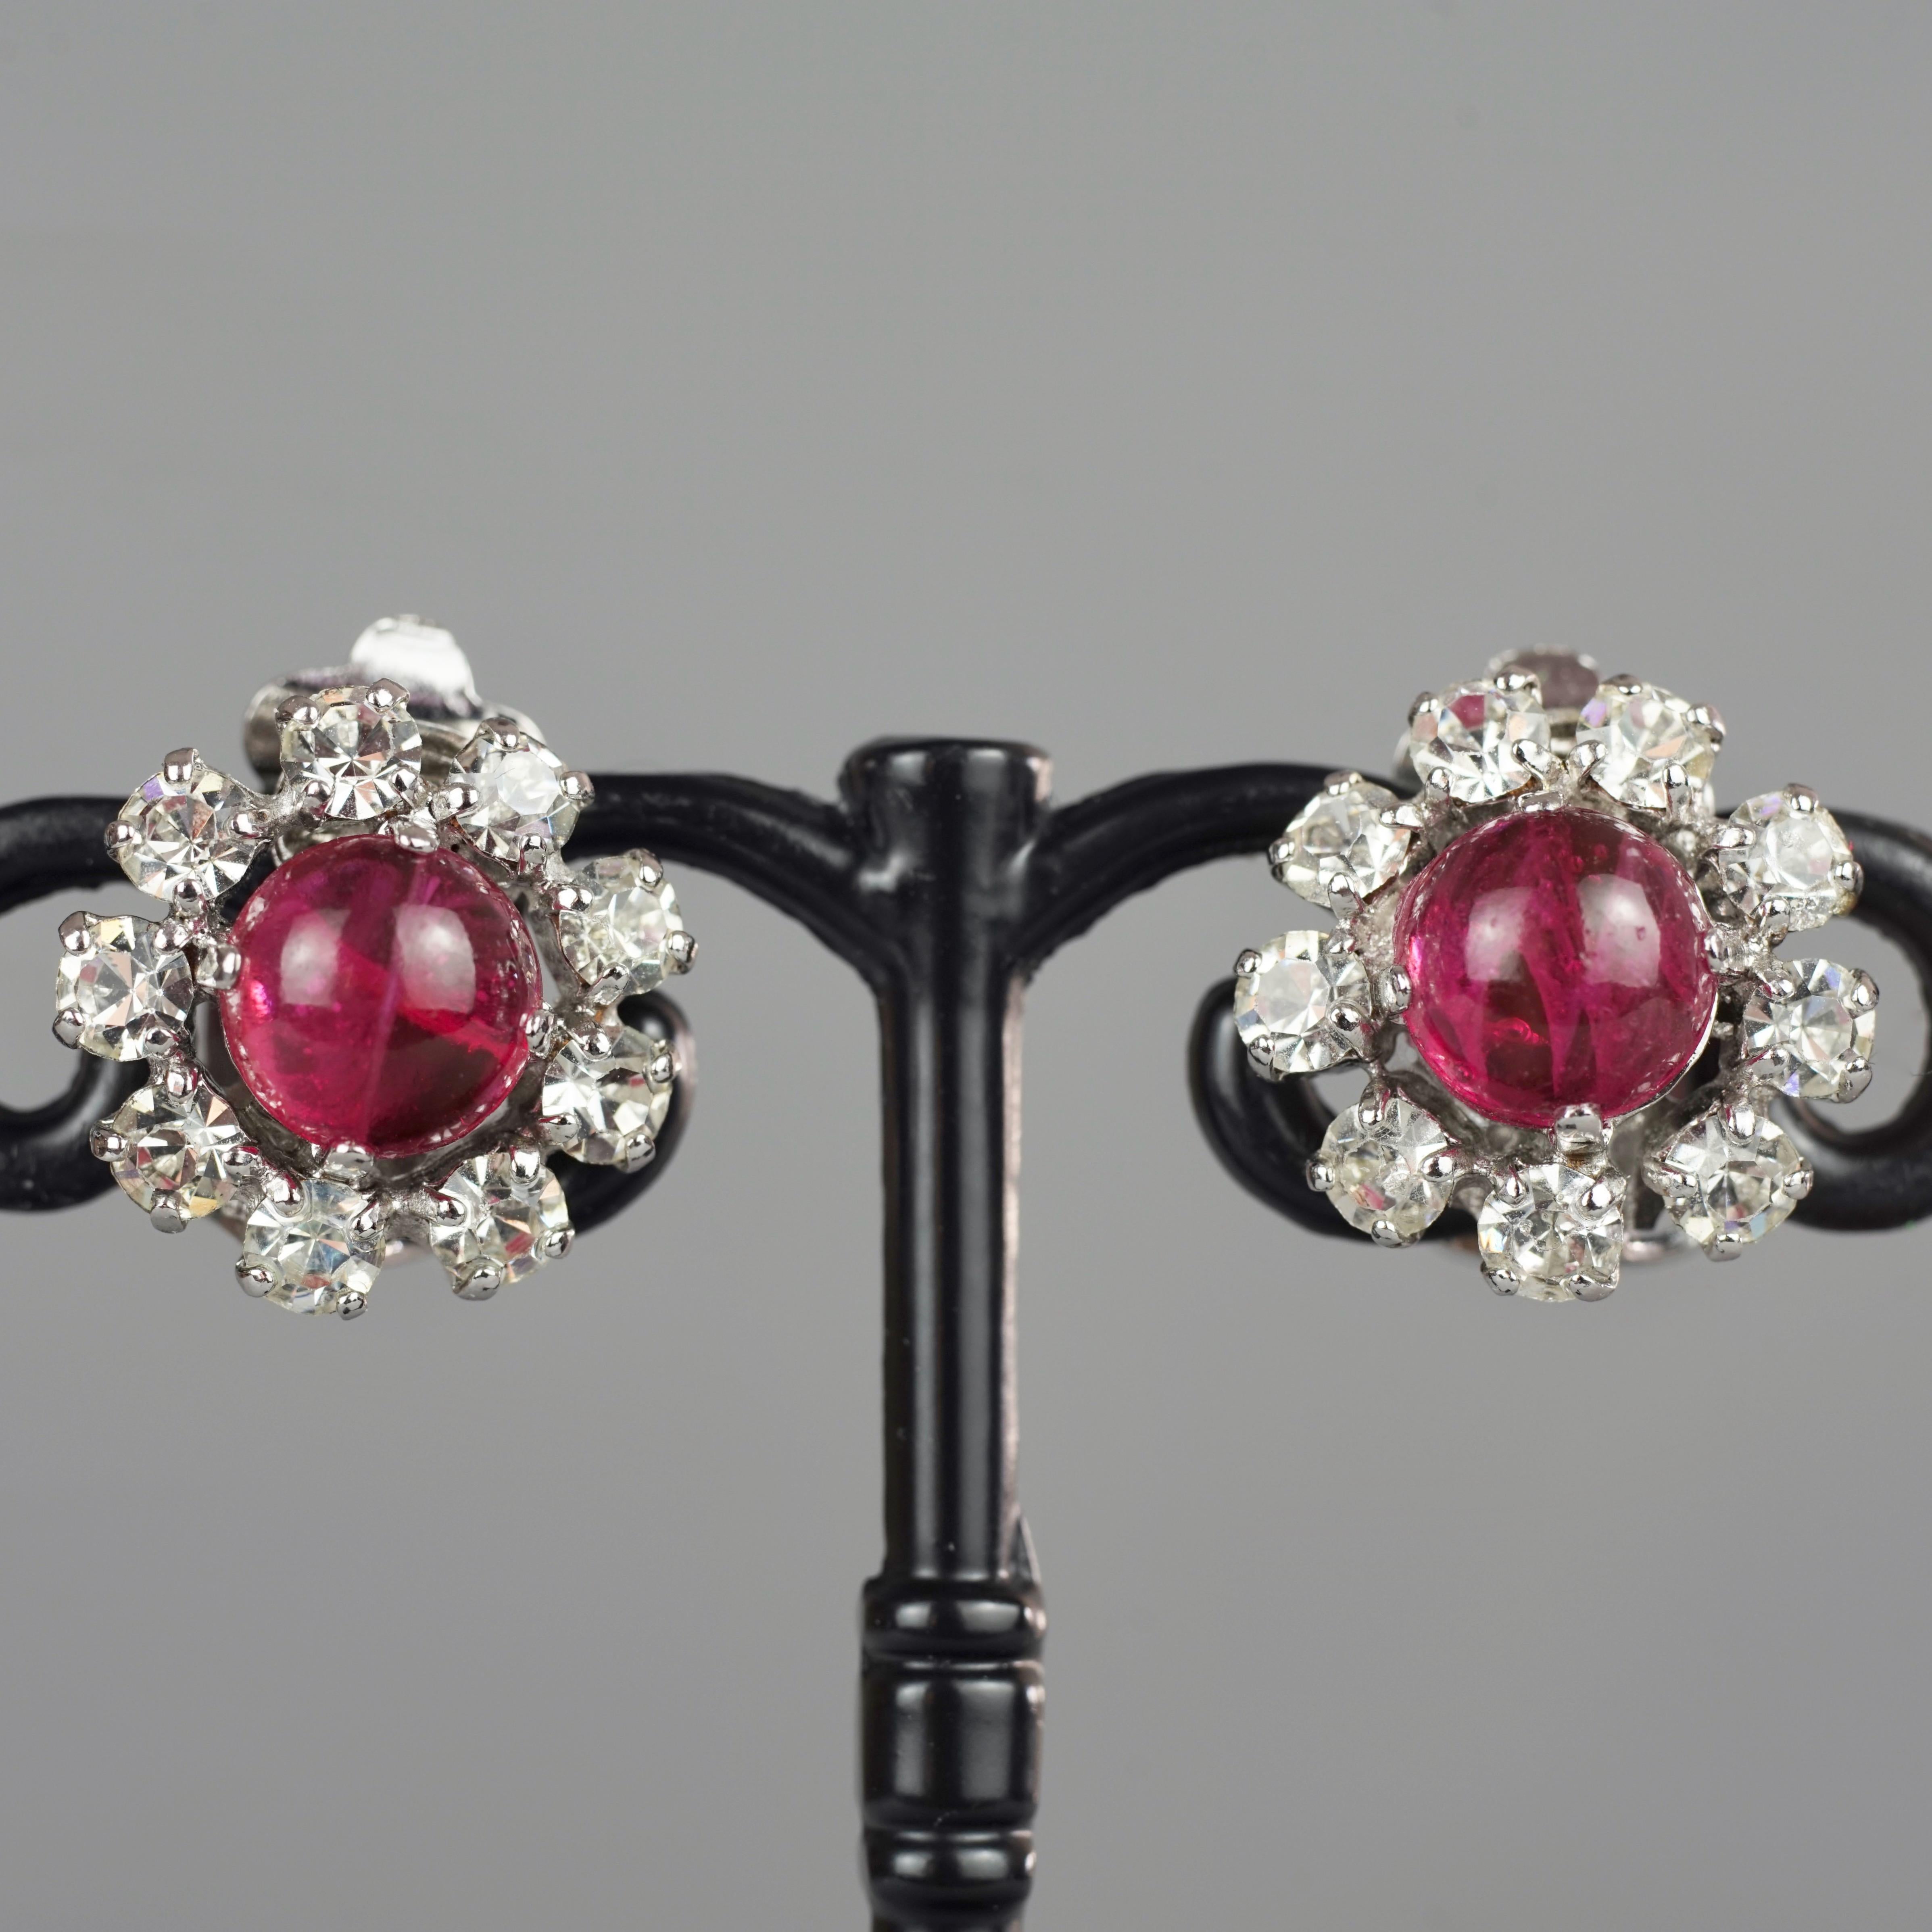 Women's Vintage 1973 CHRISTIAN DIOR Red Glass Cabochon Rhinestone Earrings For Sale